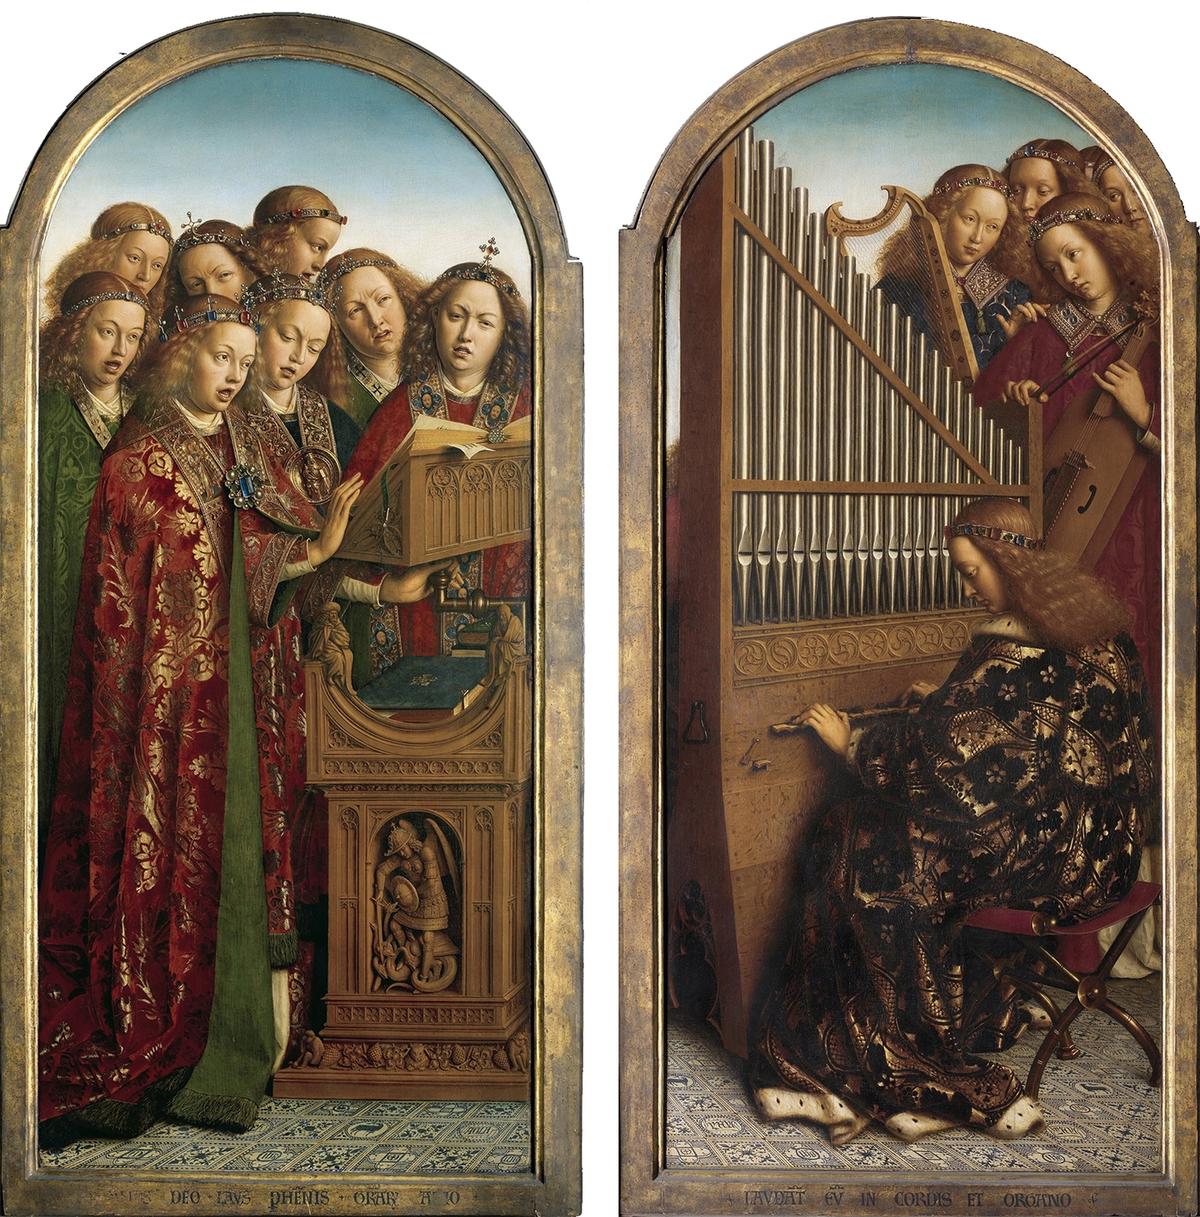 Detail of angels in left and right panels from “Ghent Altarpiece,” 1432, Hubert and Jan van Eyck. Saint Bavo’s Cathedral, Ghent, Belgium. (Public Domain)